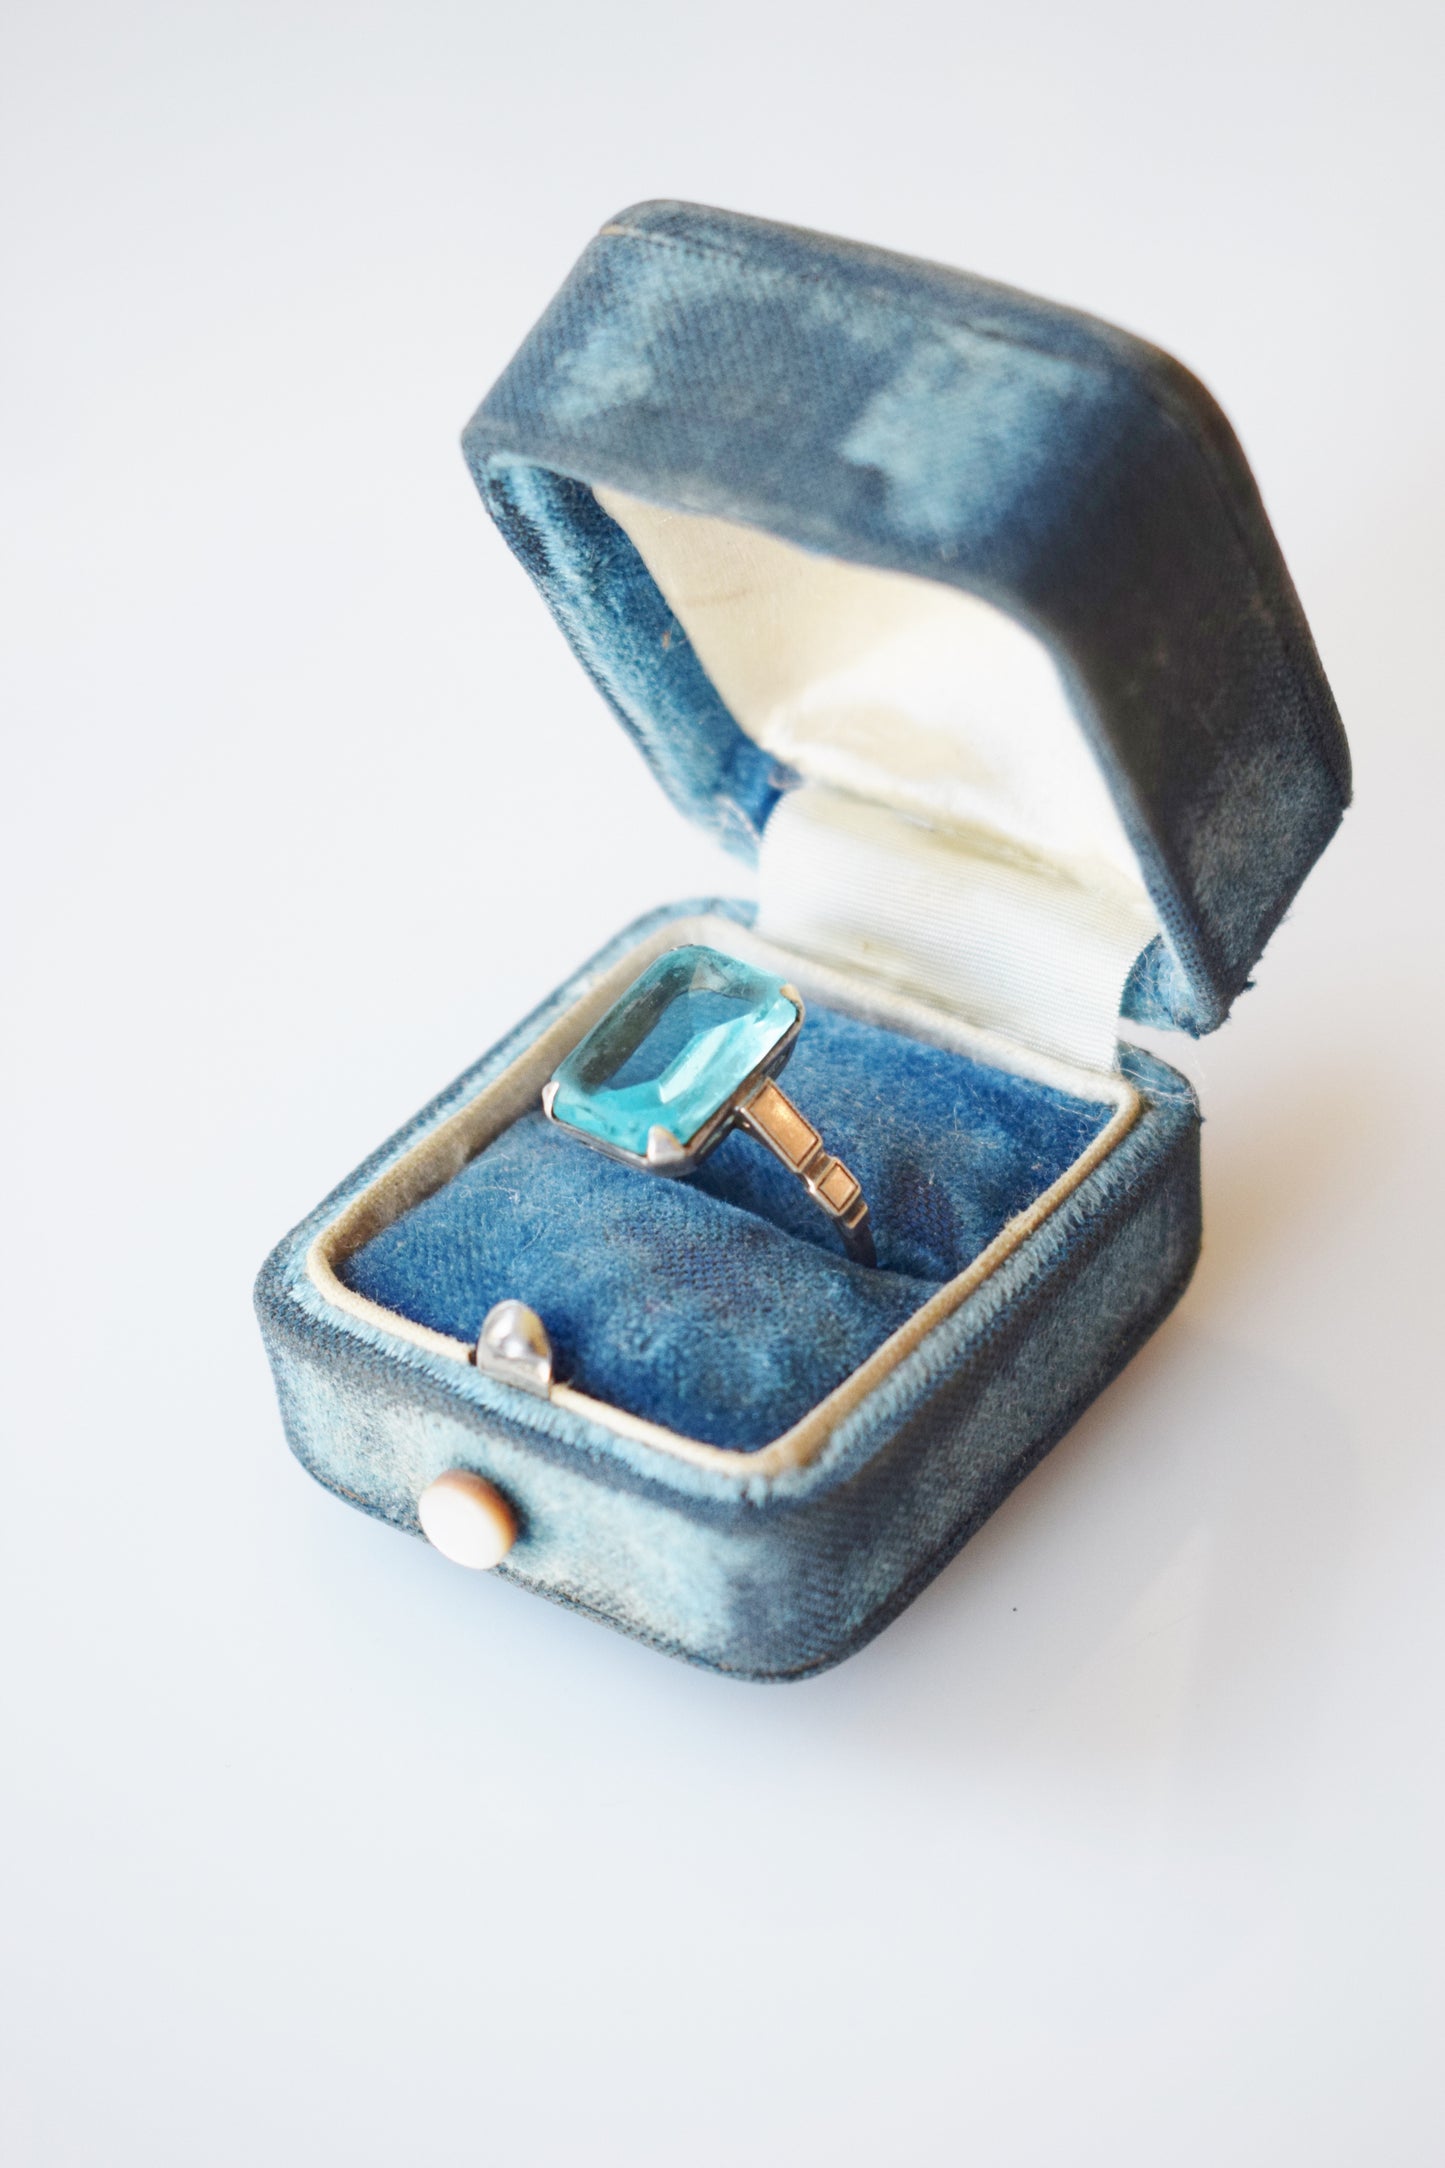 Vintage Art Deco Simulated Aquamarine and Silver Ring | 6.75